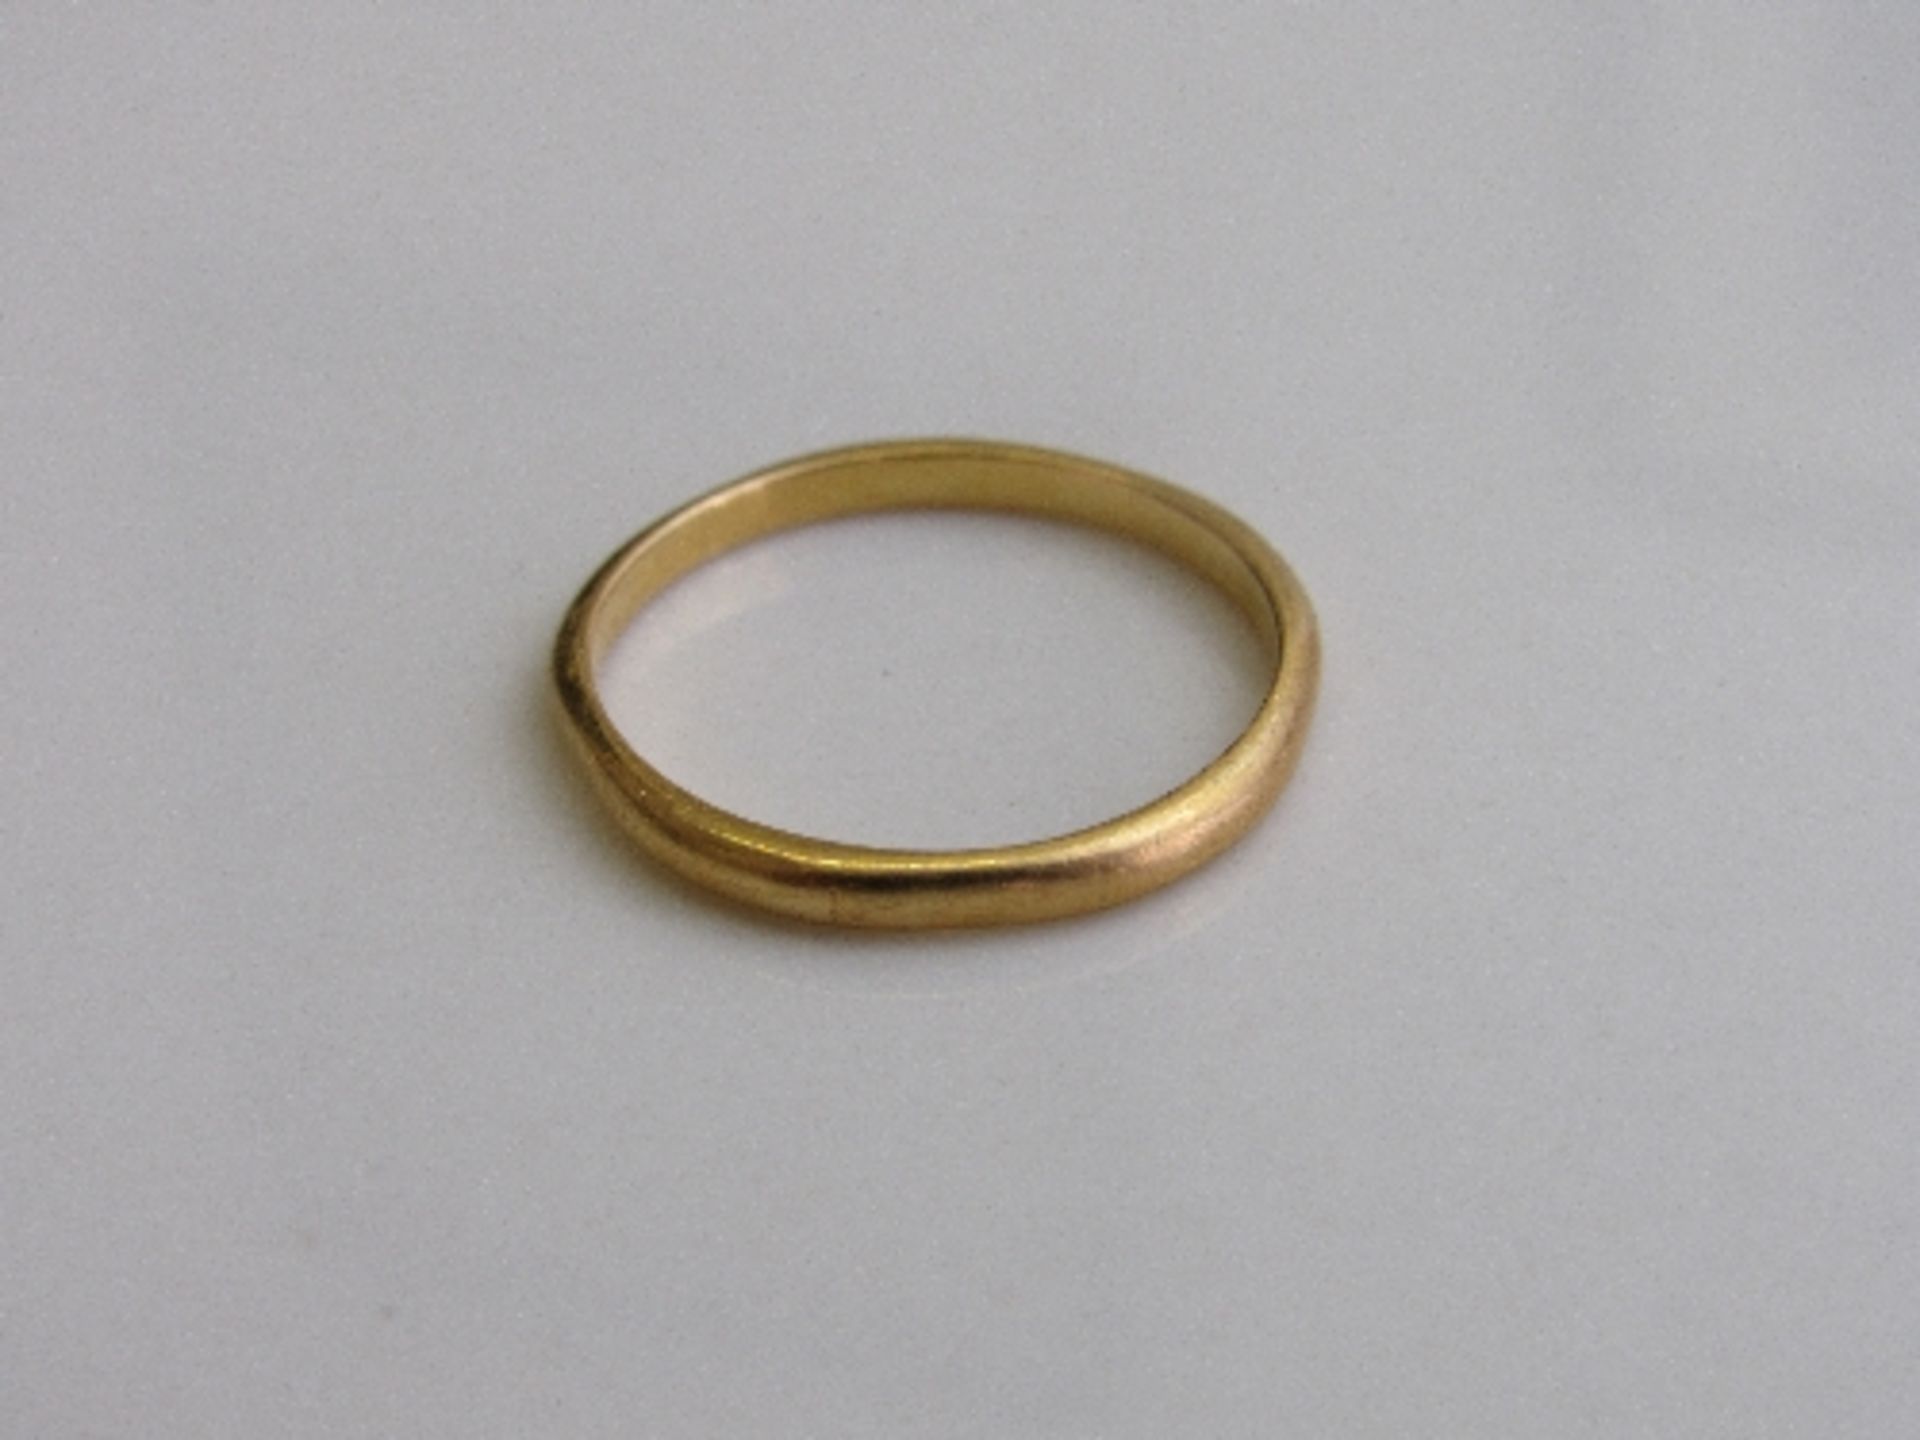 22ct gold wedding band, size M 1/2, weight 2gms. Estimate £50-70 - Image 2 of 2